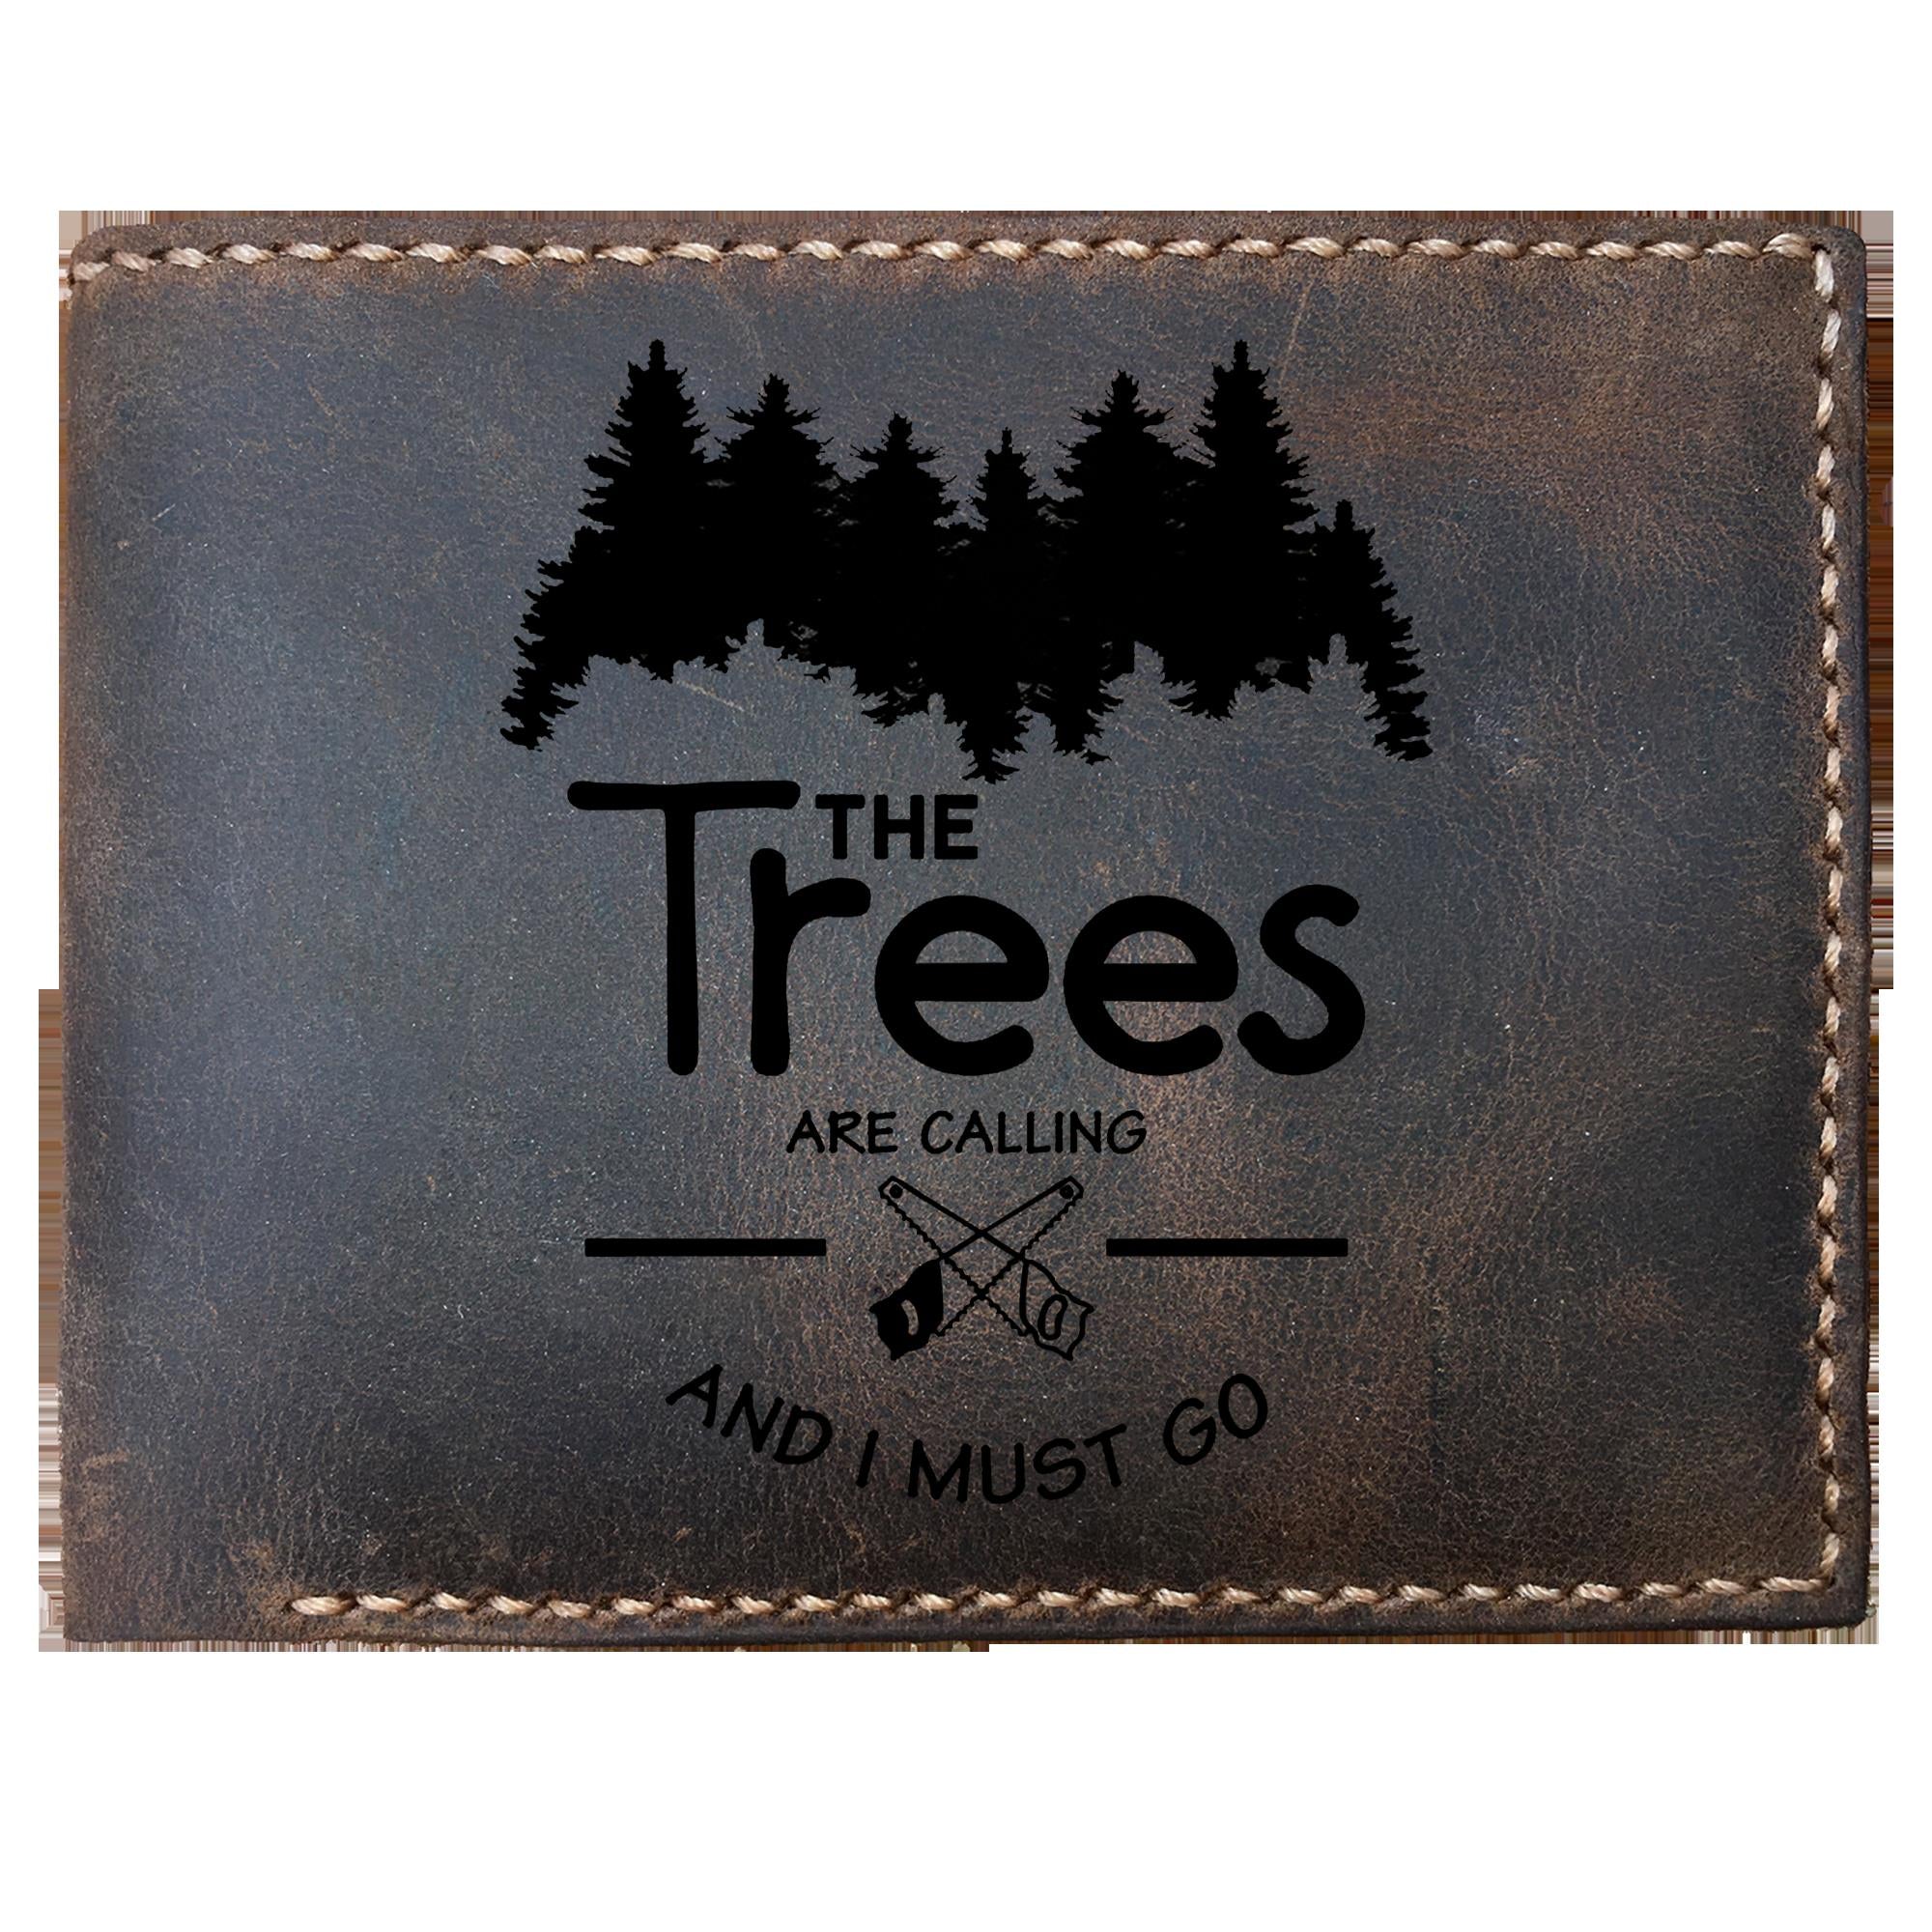 Skitongifts Funny Custom Laser Engraved Bifold Leather Wallet For Men, The Trees Are Calling And I Must Go,S For Carpenter Arborists